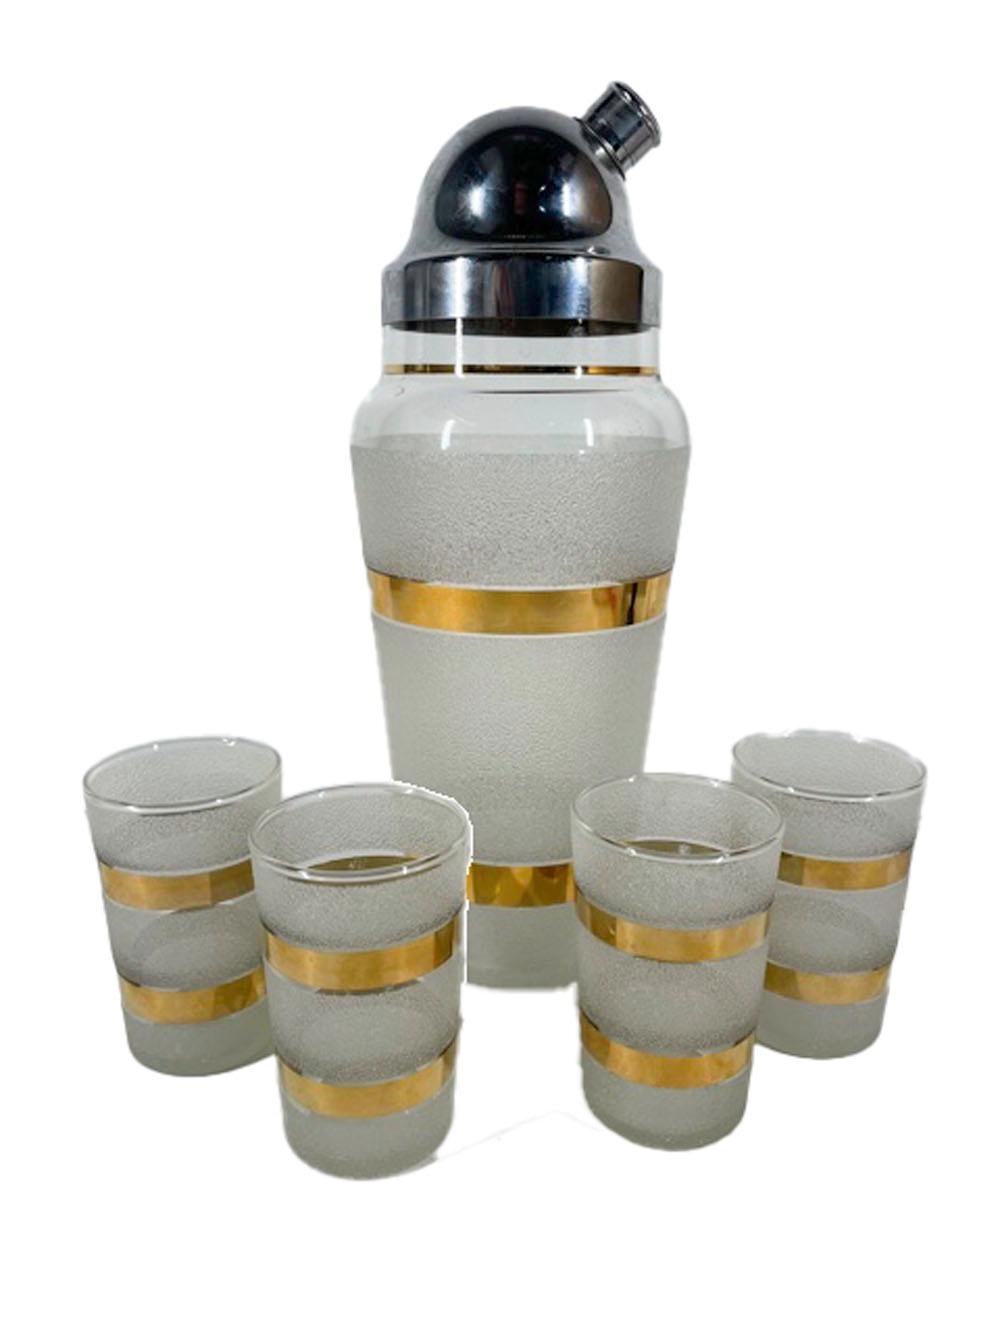 Art Deco Vintage Cocktail Shaker Set with Gold Bands and Textured Frosted Surface For Sale